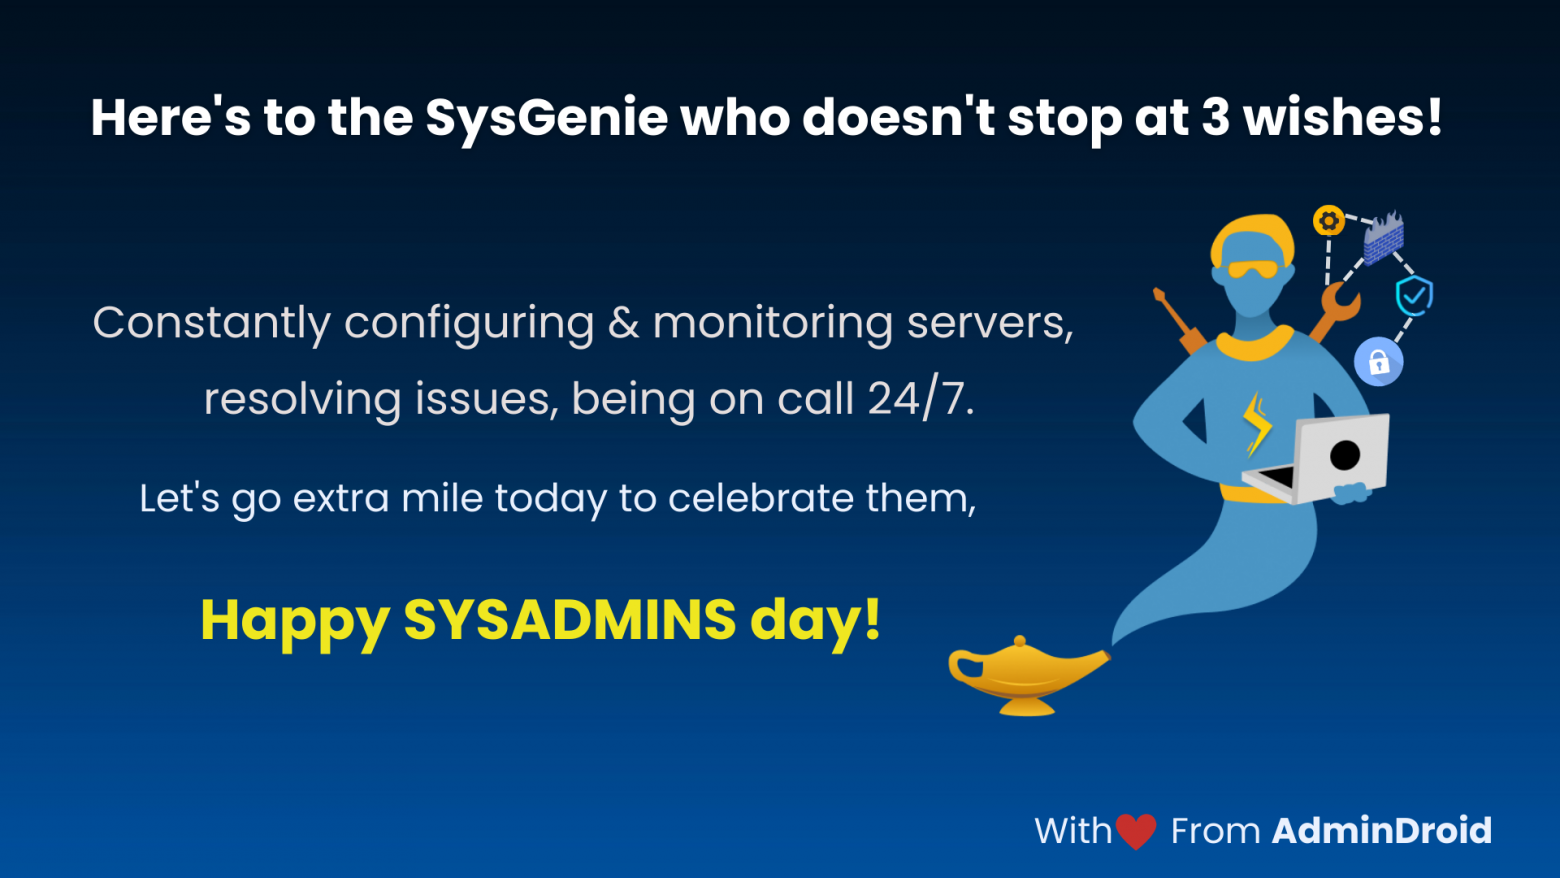 Here’s to the SysGenie who doesn’t stop at 3 wishes!